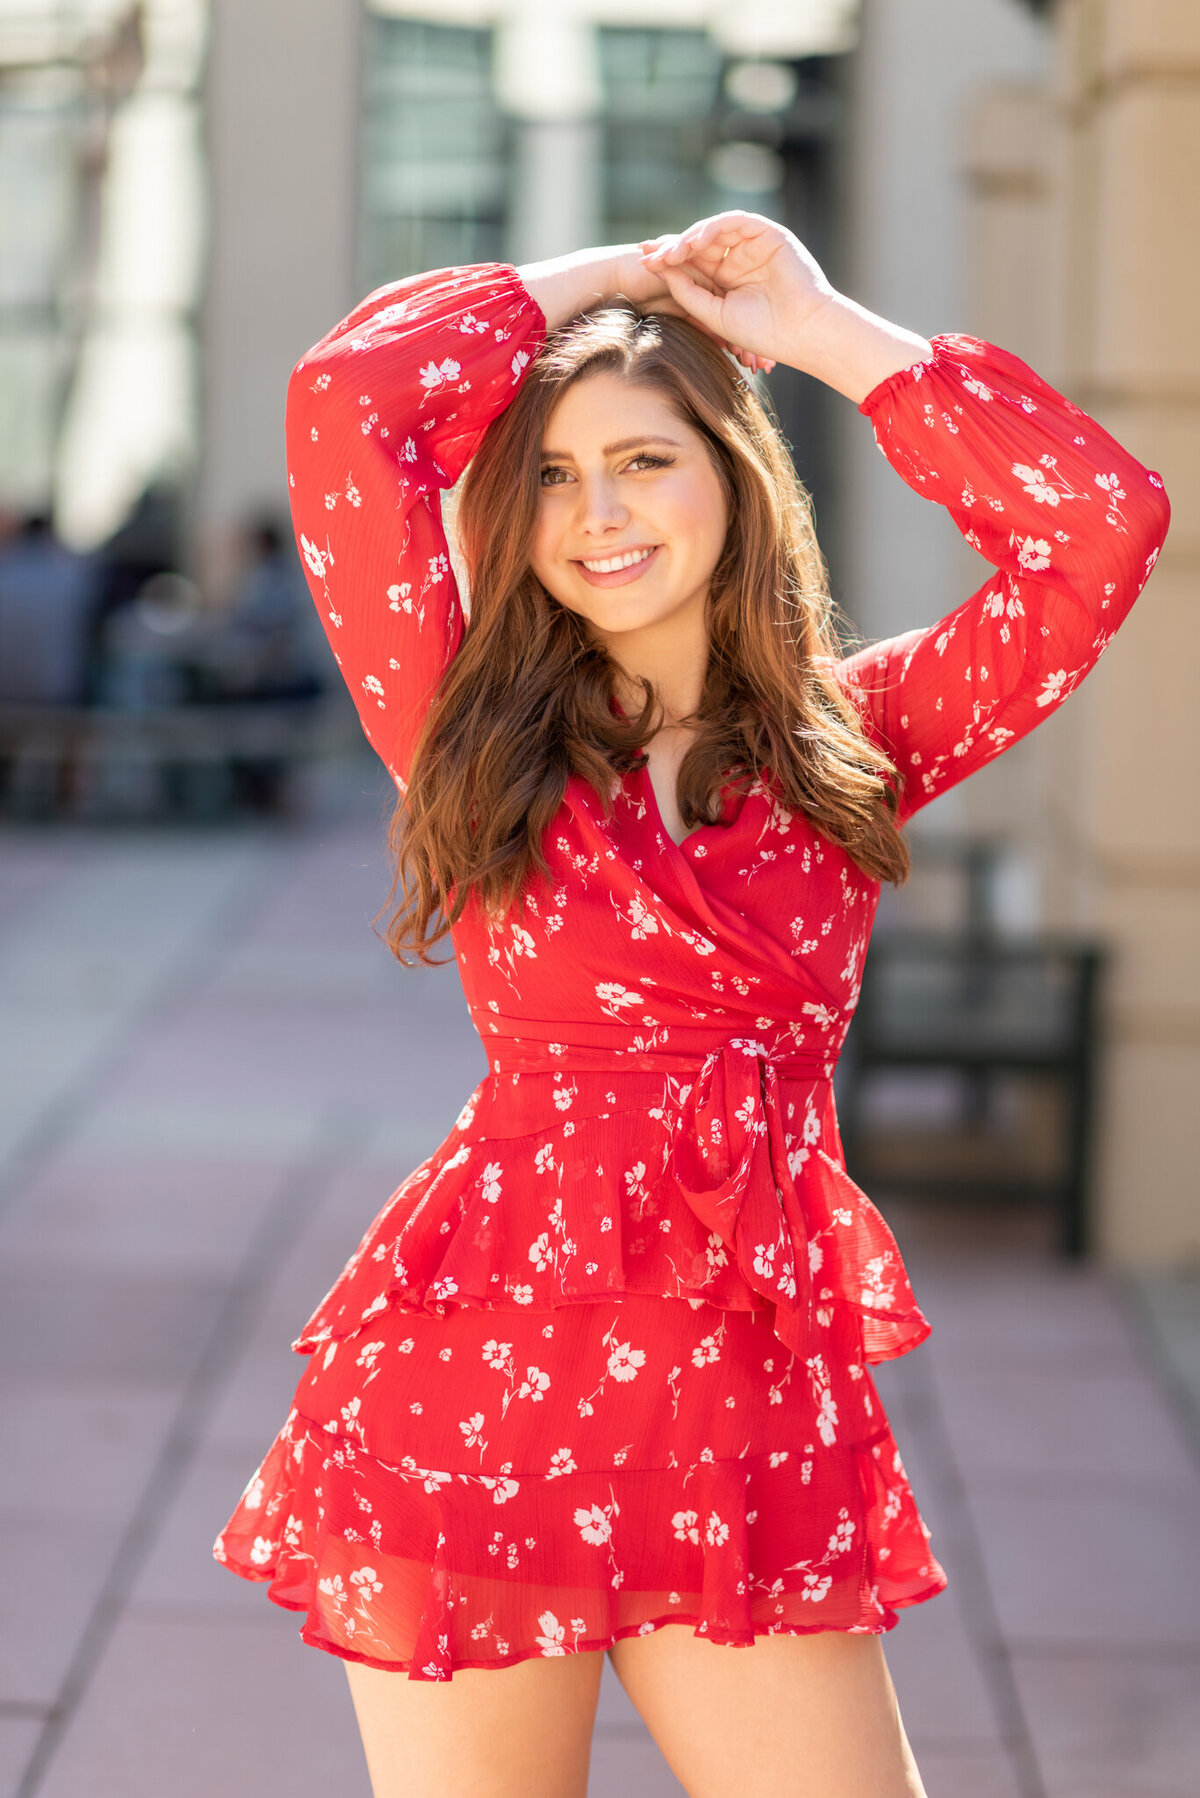 Smiling-woman-in-red-romper-high-school-senior-pictures-ivy-towler-iowa-photography